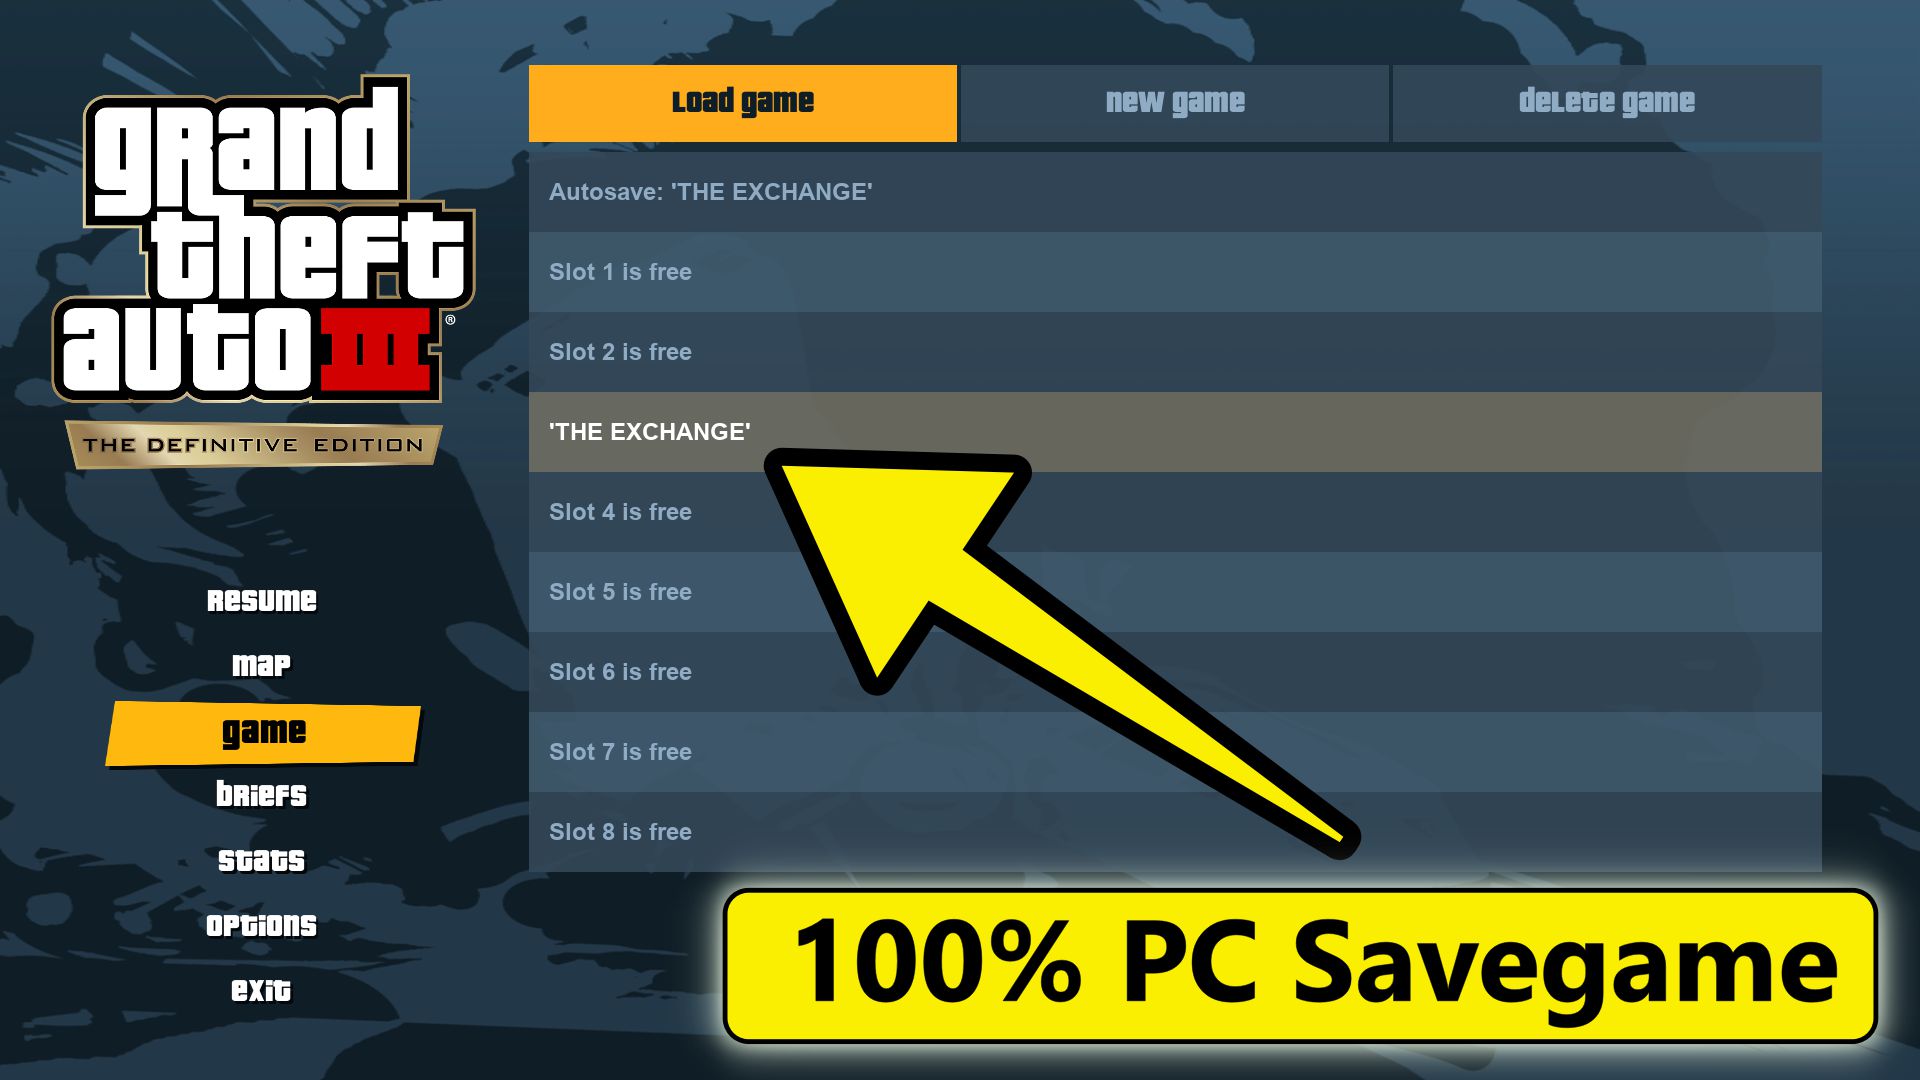 GTA 3 definitive edition 100% PC Save Game is here